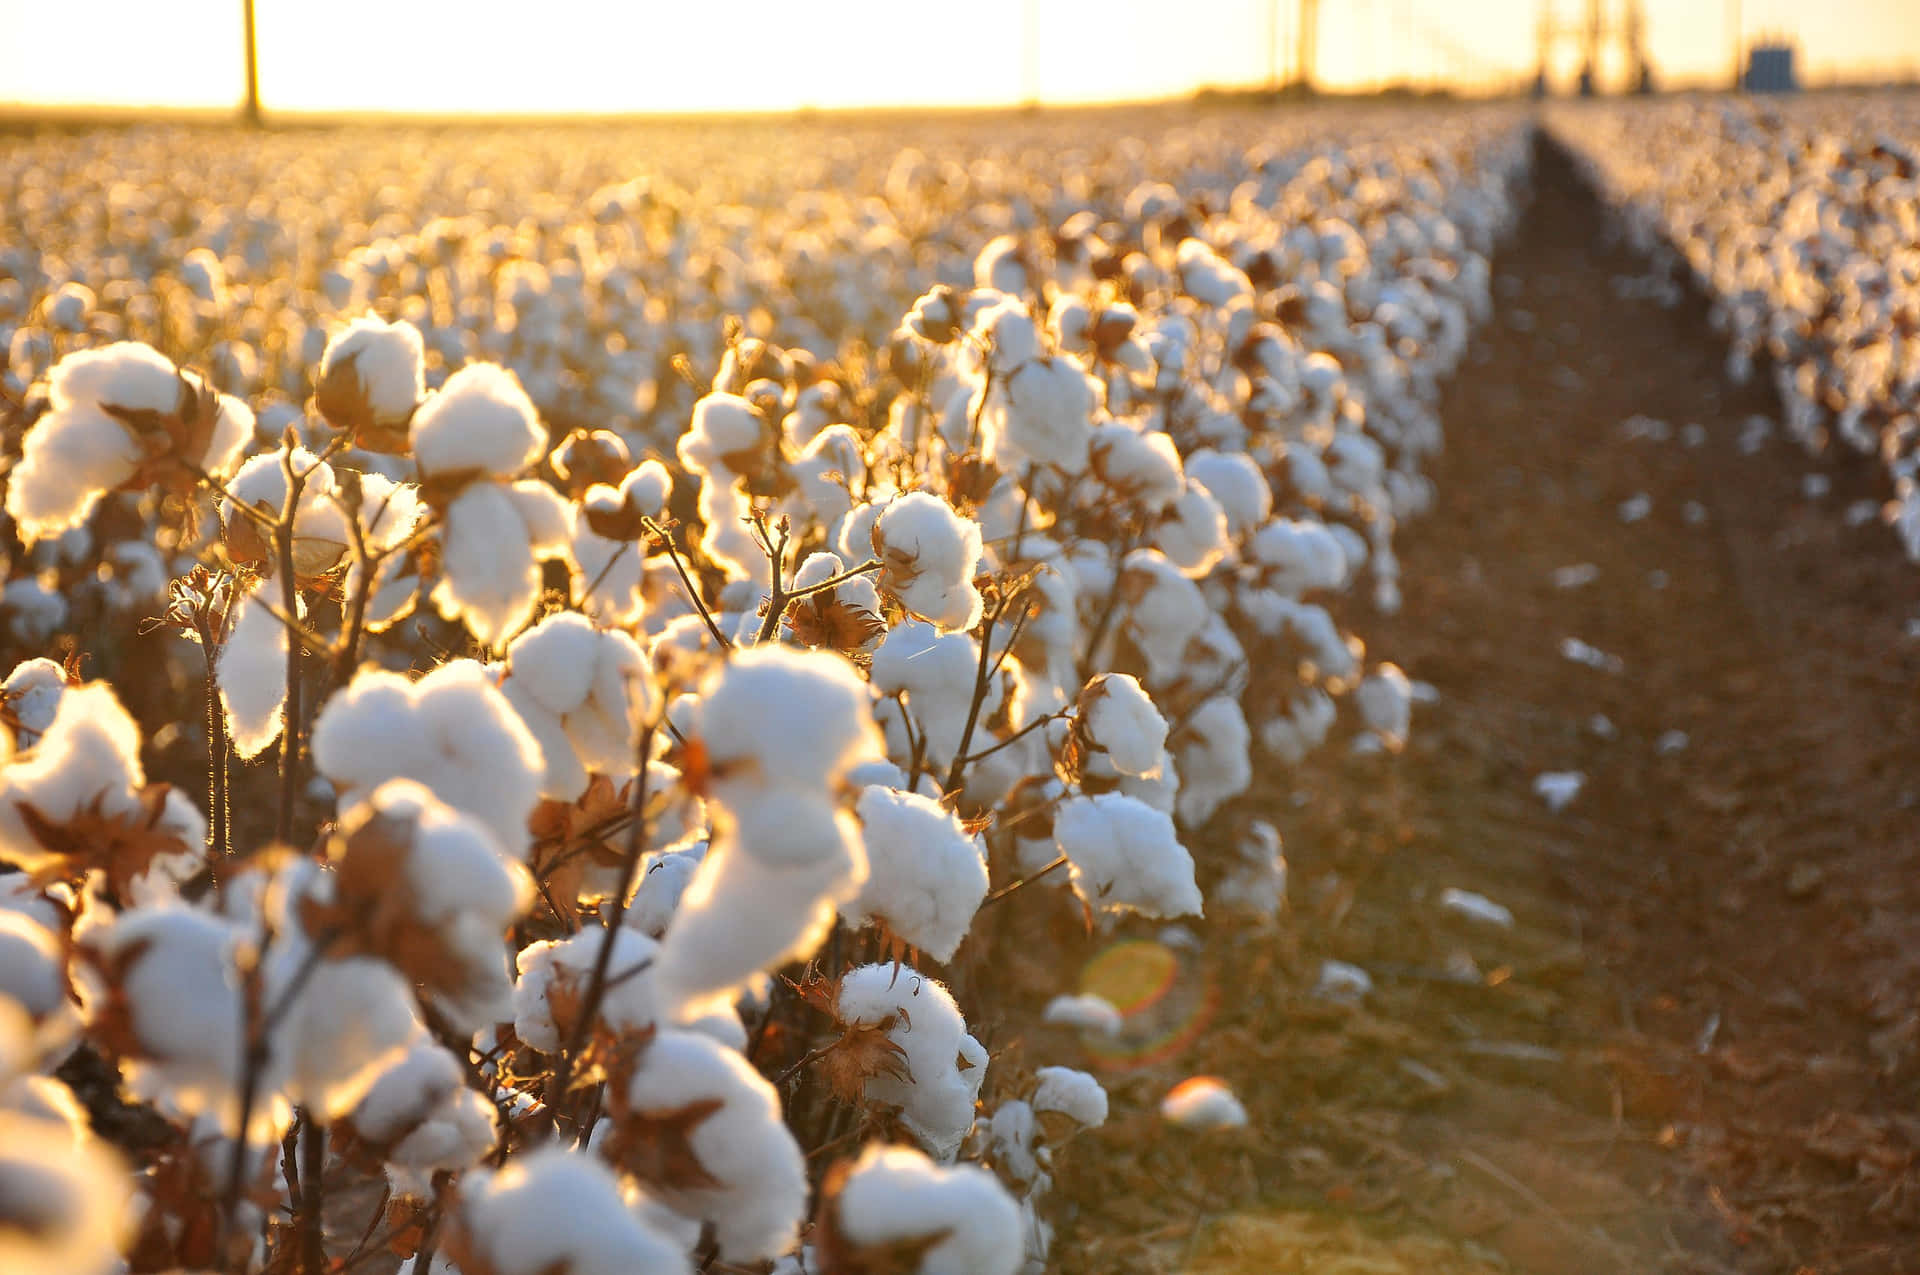 A scenic view of a cotton field during a beautiful sunset